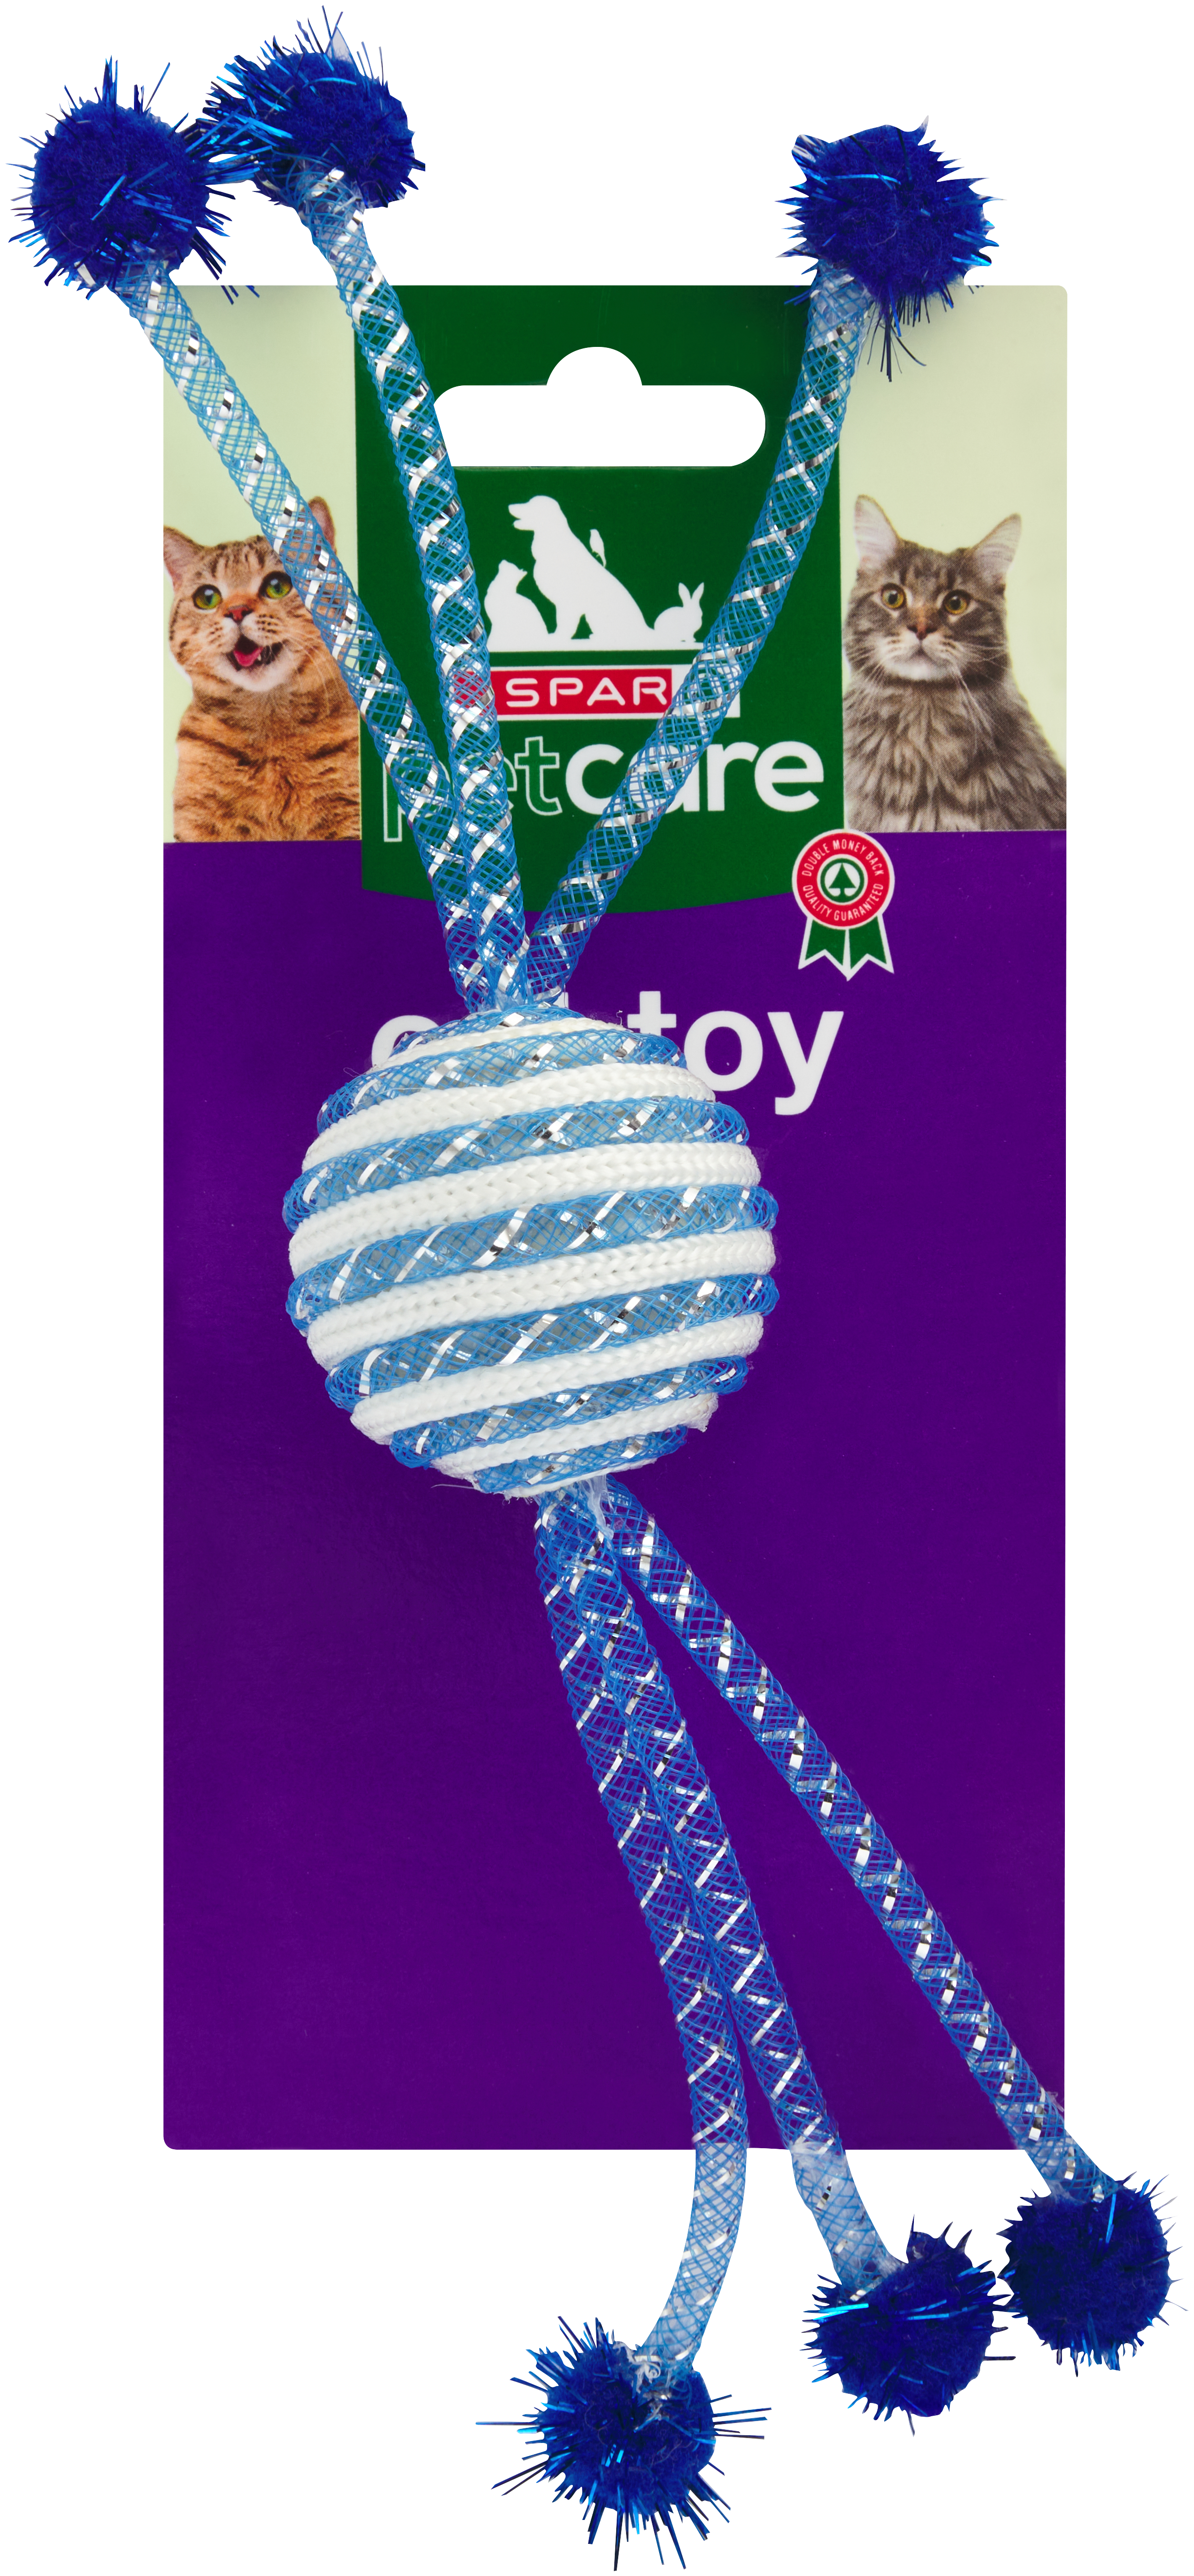 cat toy assorted